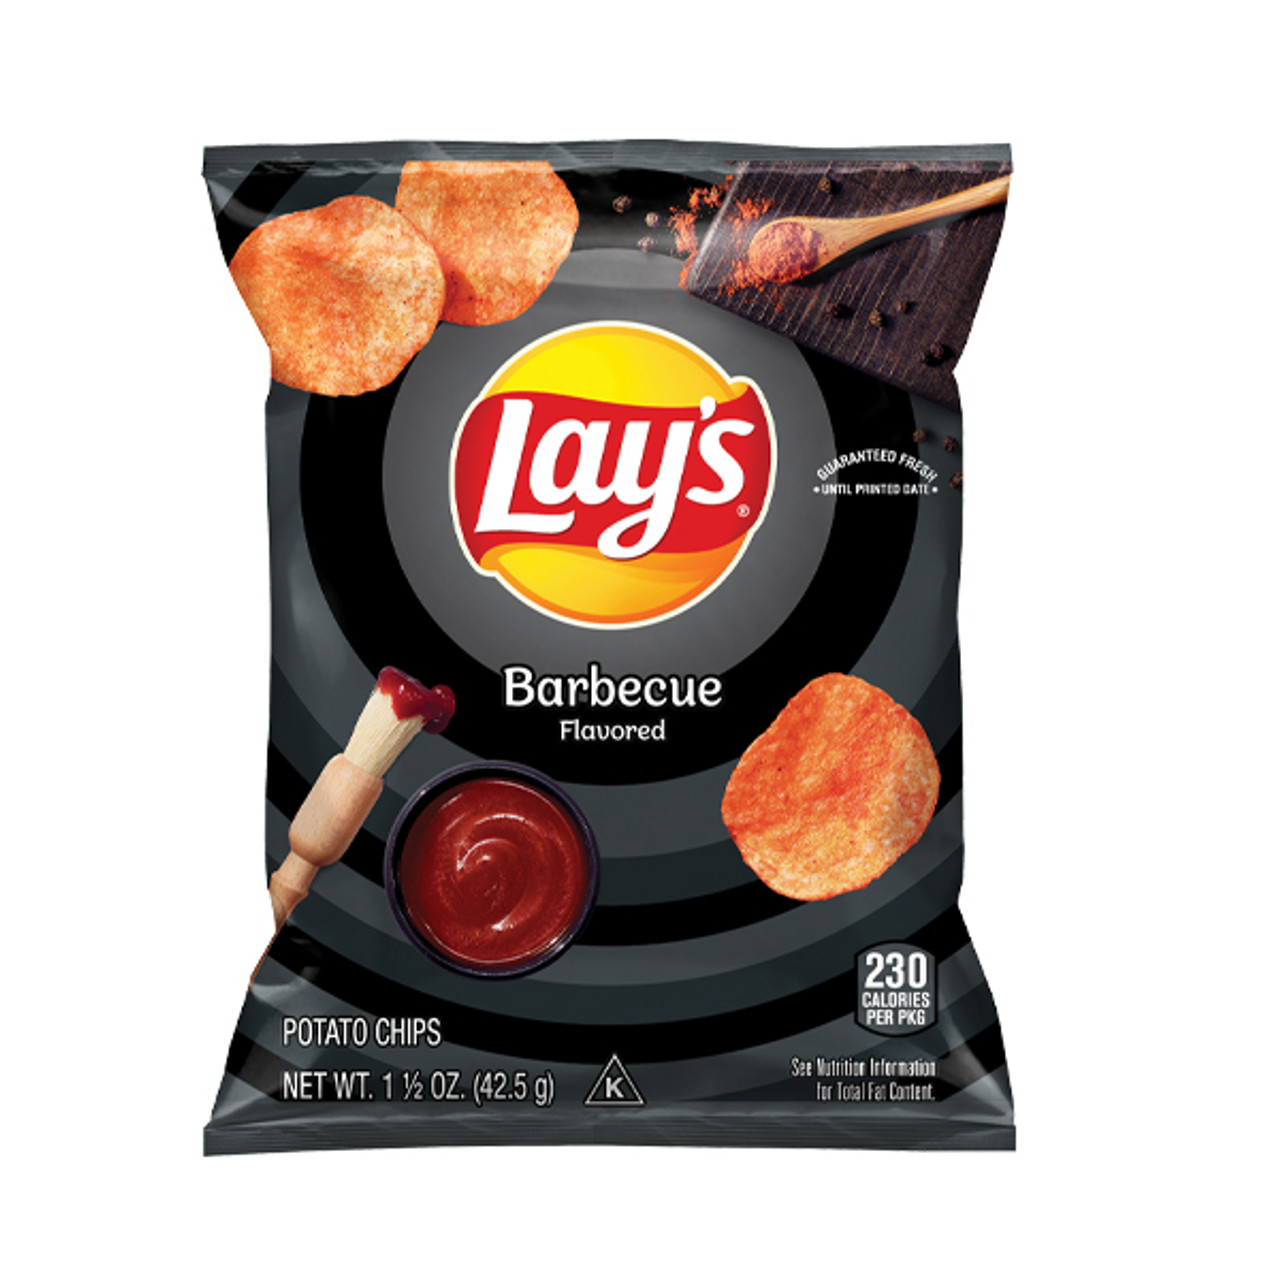 Lays barbecue